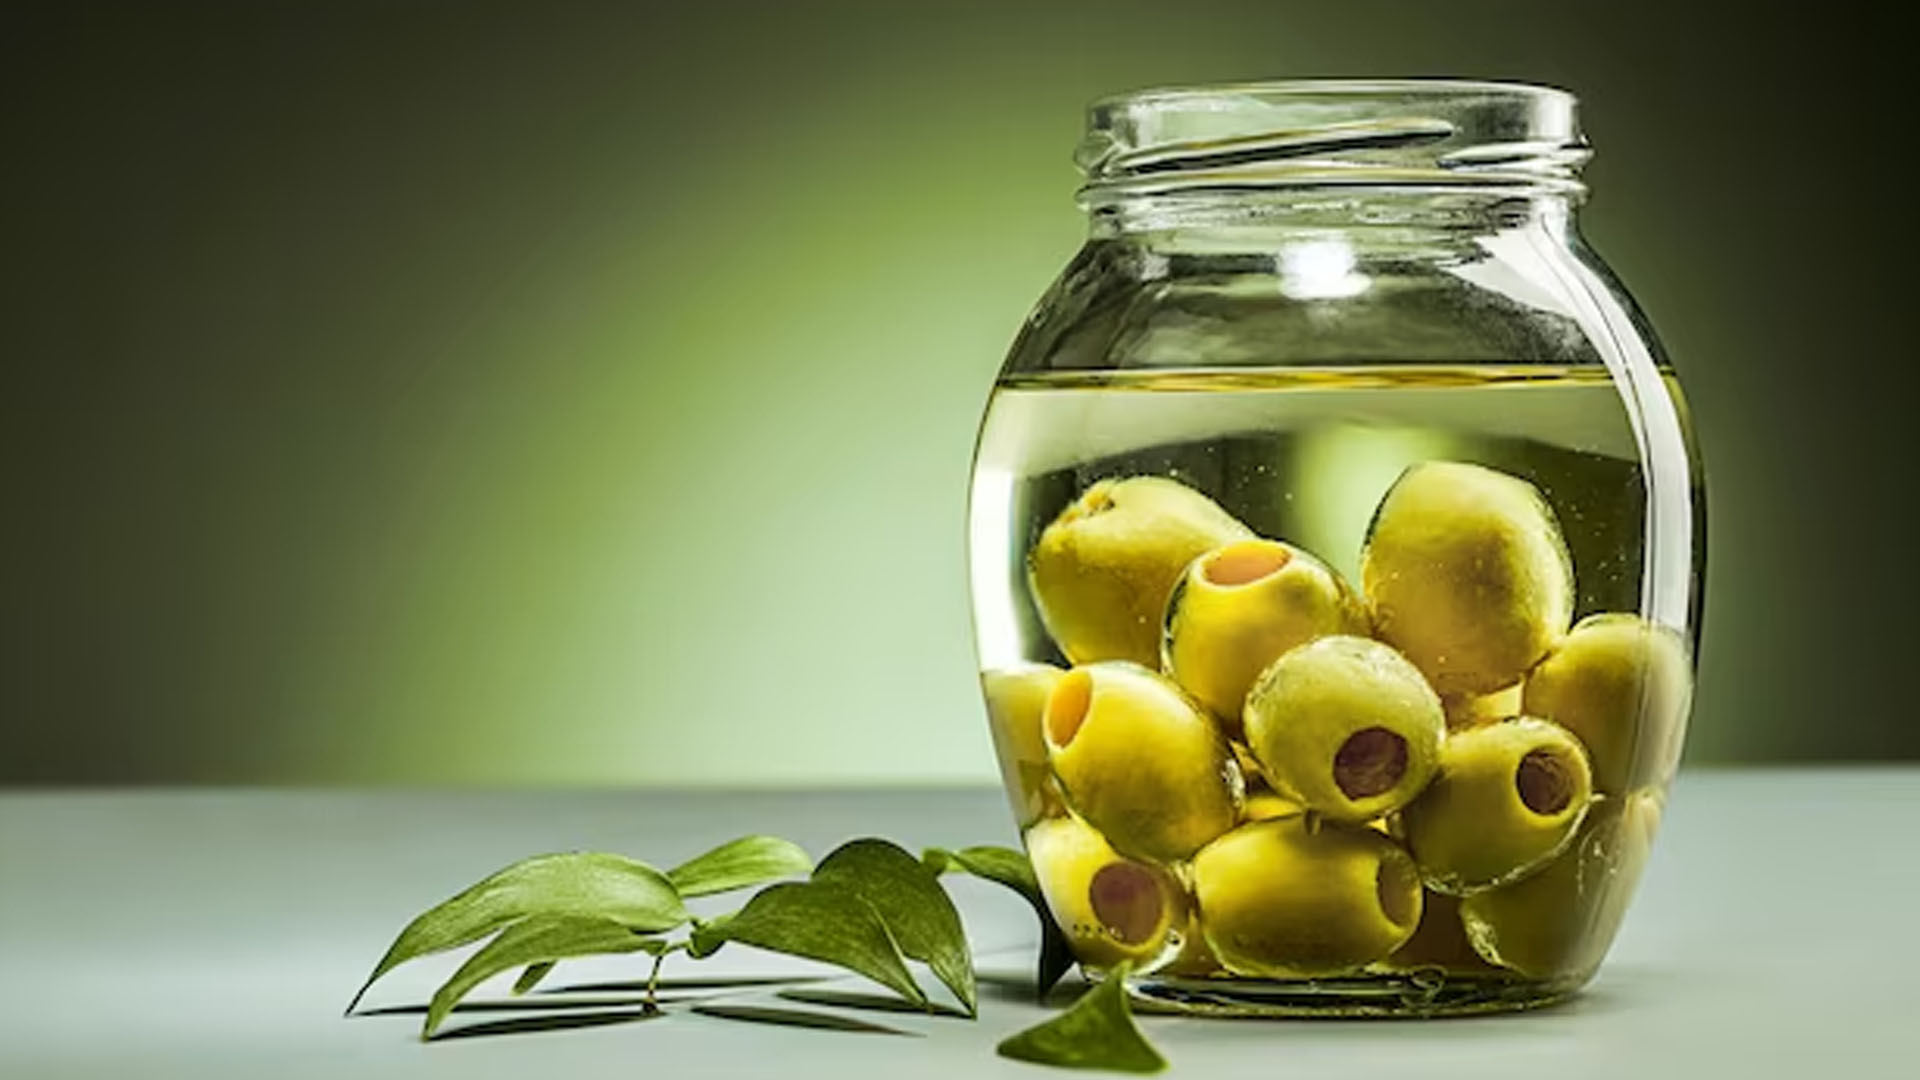 What Are The Health Benefits of Olive?